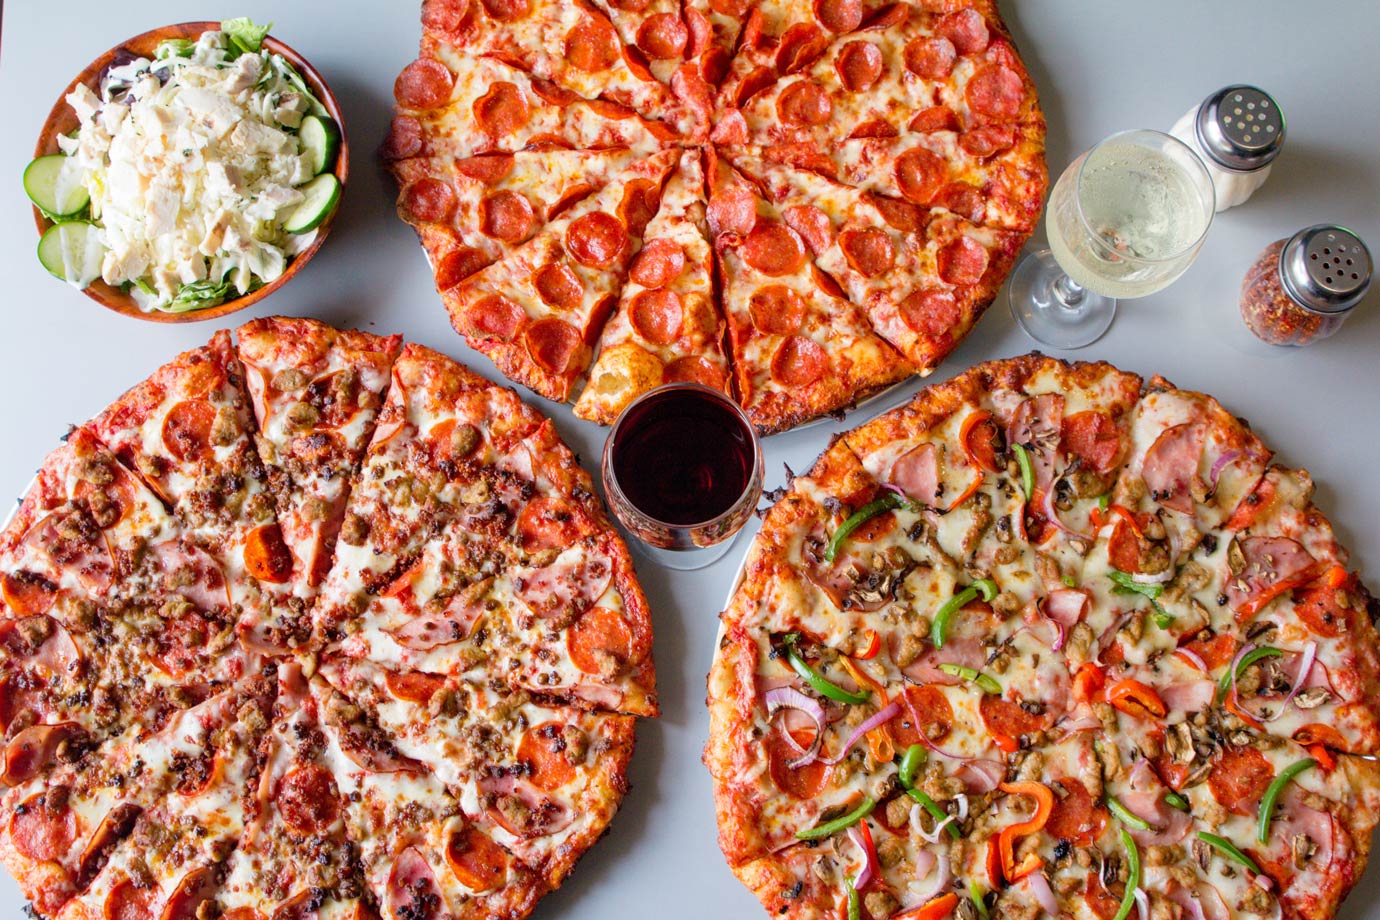 three pizzas, two glasses of wine and a salad